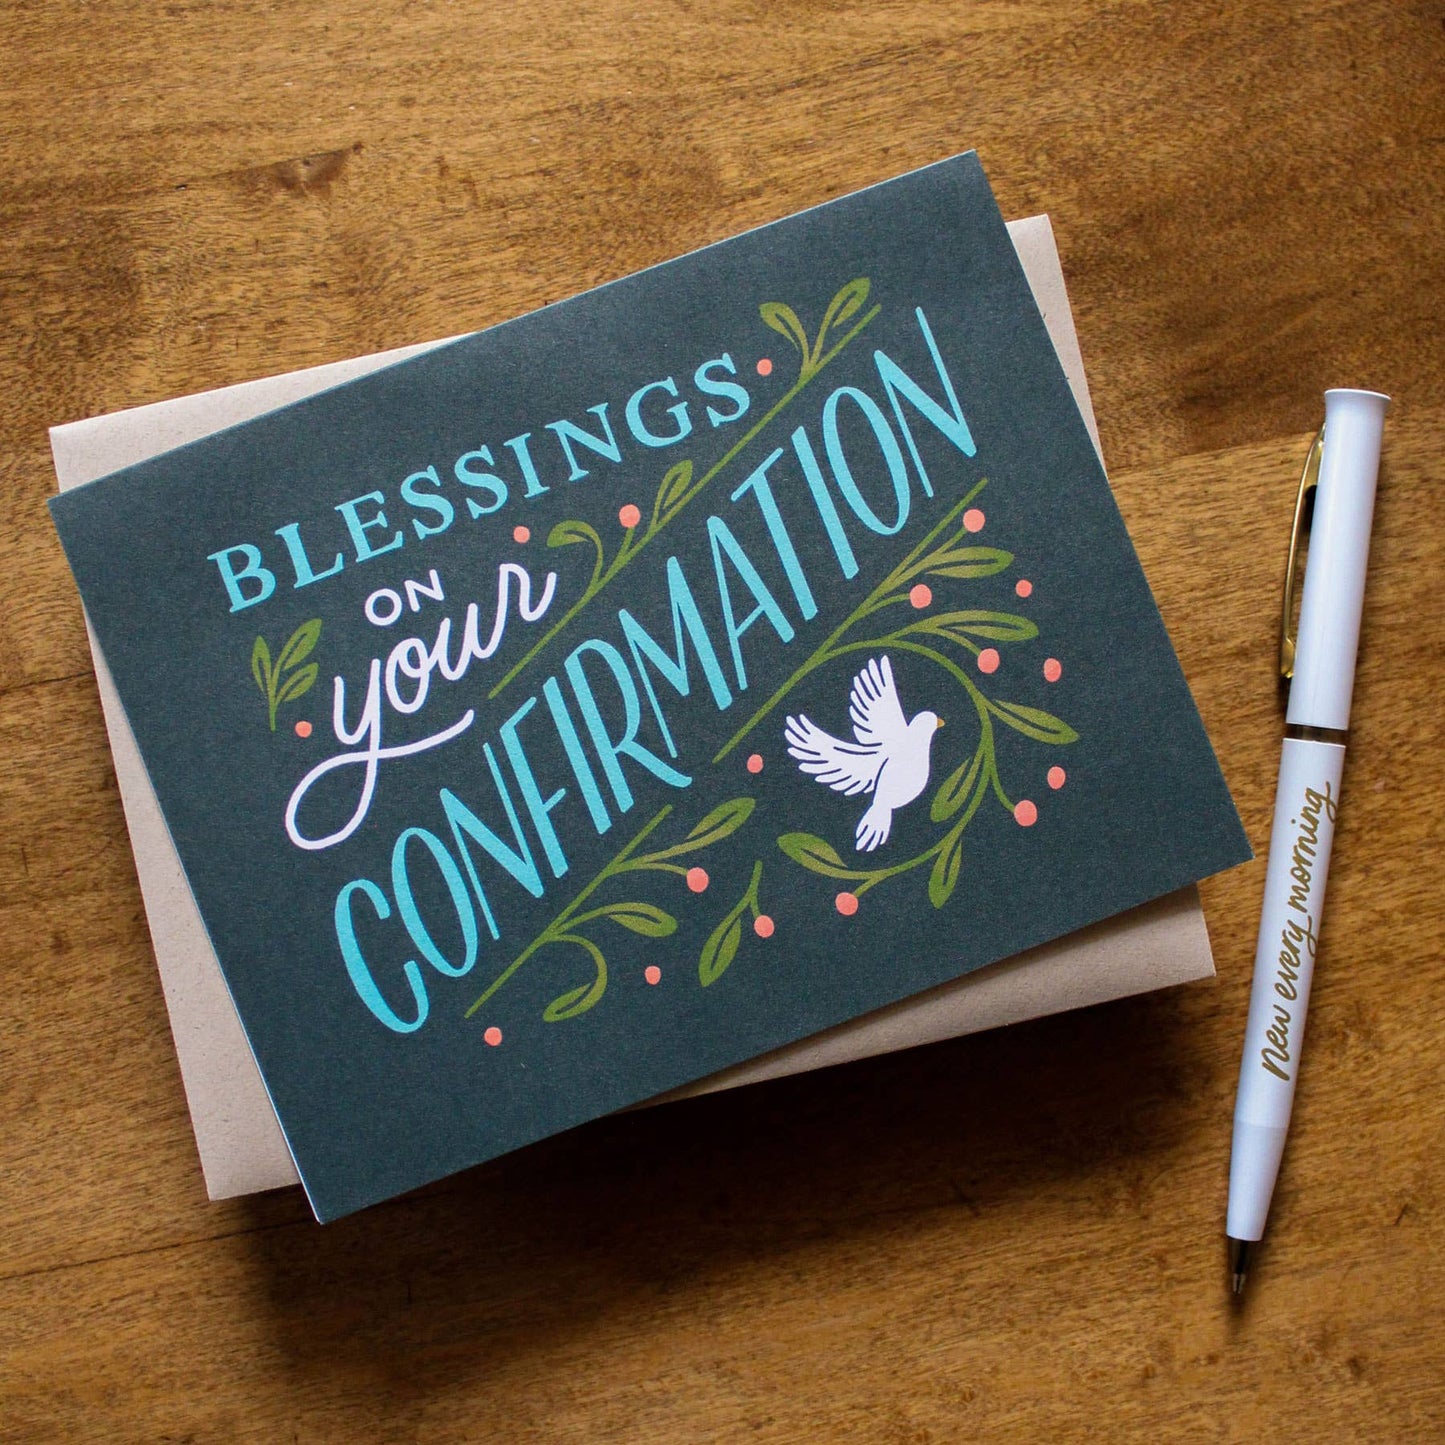 Blessings on Your Confirmation Card